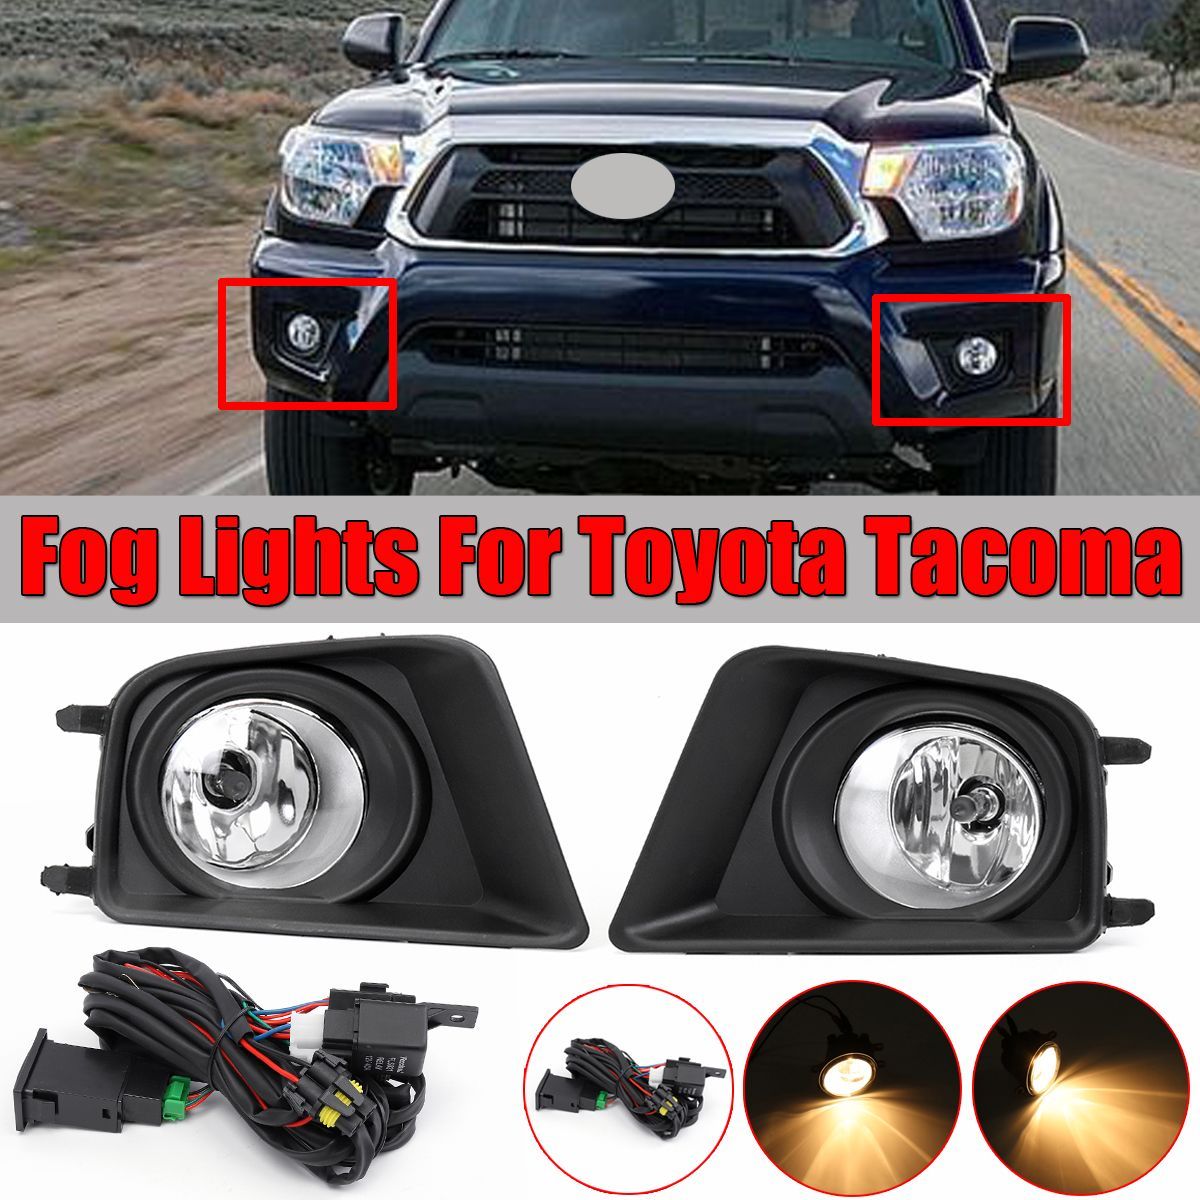 2Pcs-Car-Fog-Light-H11-Bulbs-Black-With-Wire-Harness-Covers-Kit-For-Toyota-Tacoma-2012-2015-1680515